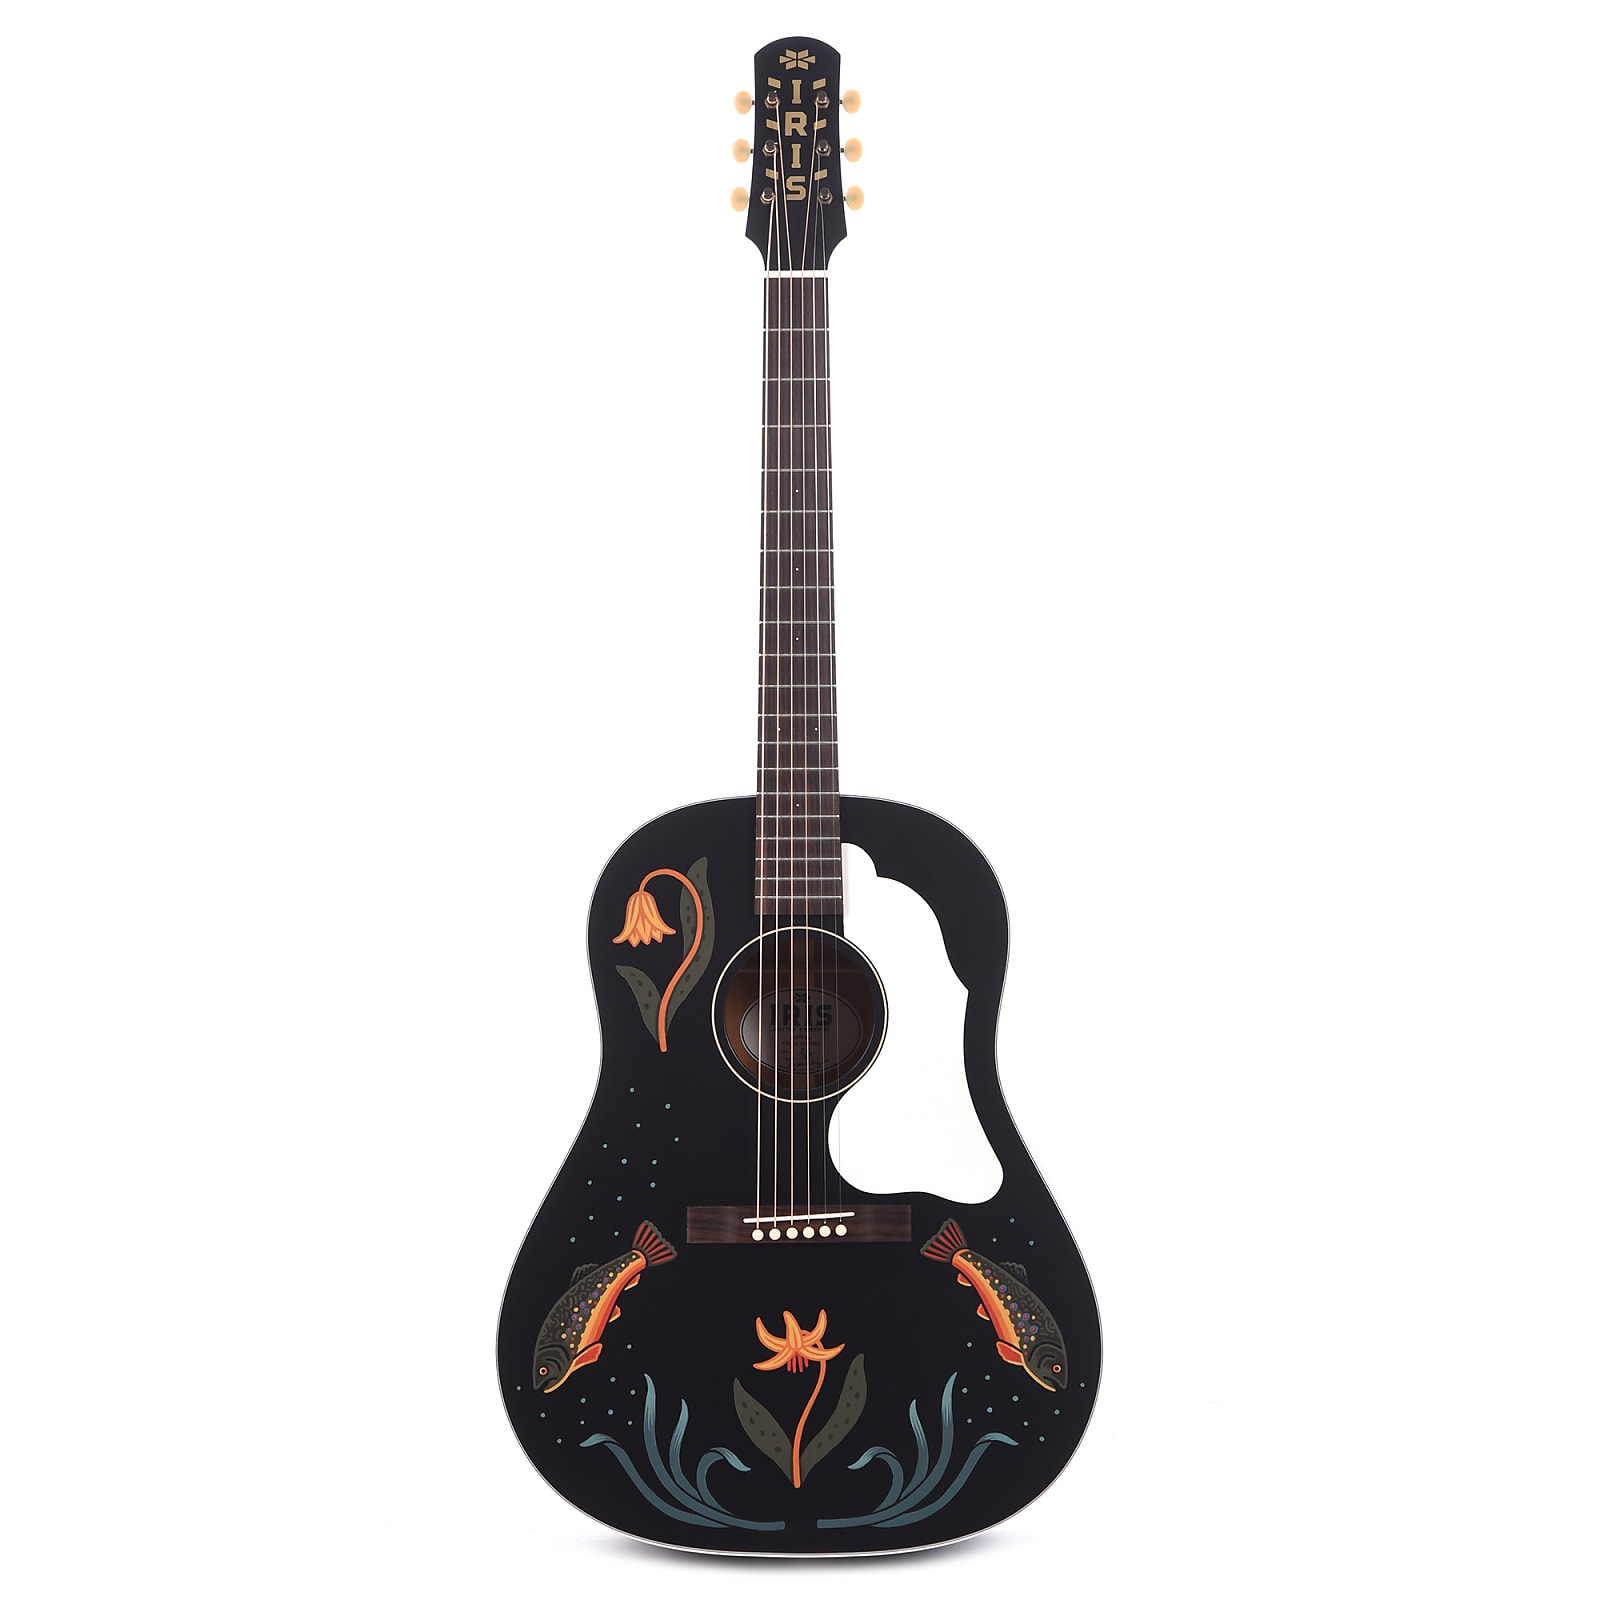 Iris Limited Edition DF Dreadnought Black Hand Painted by Sarah Ryan